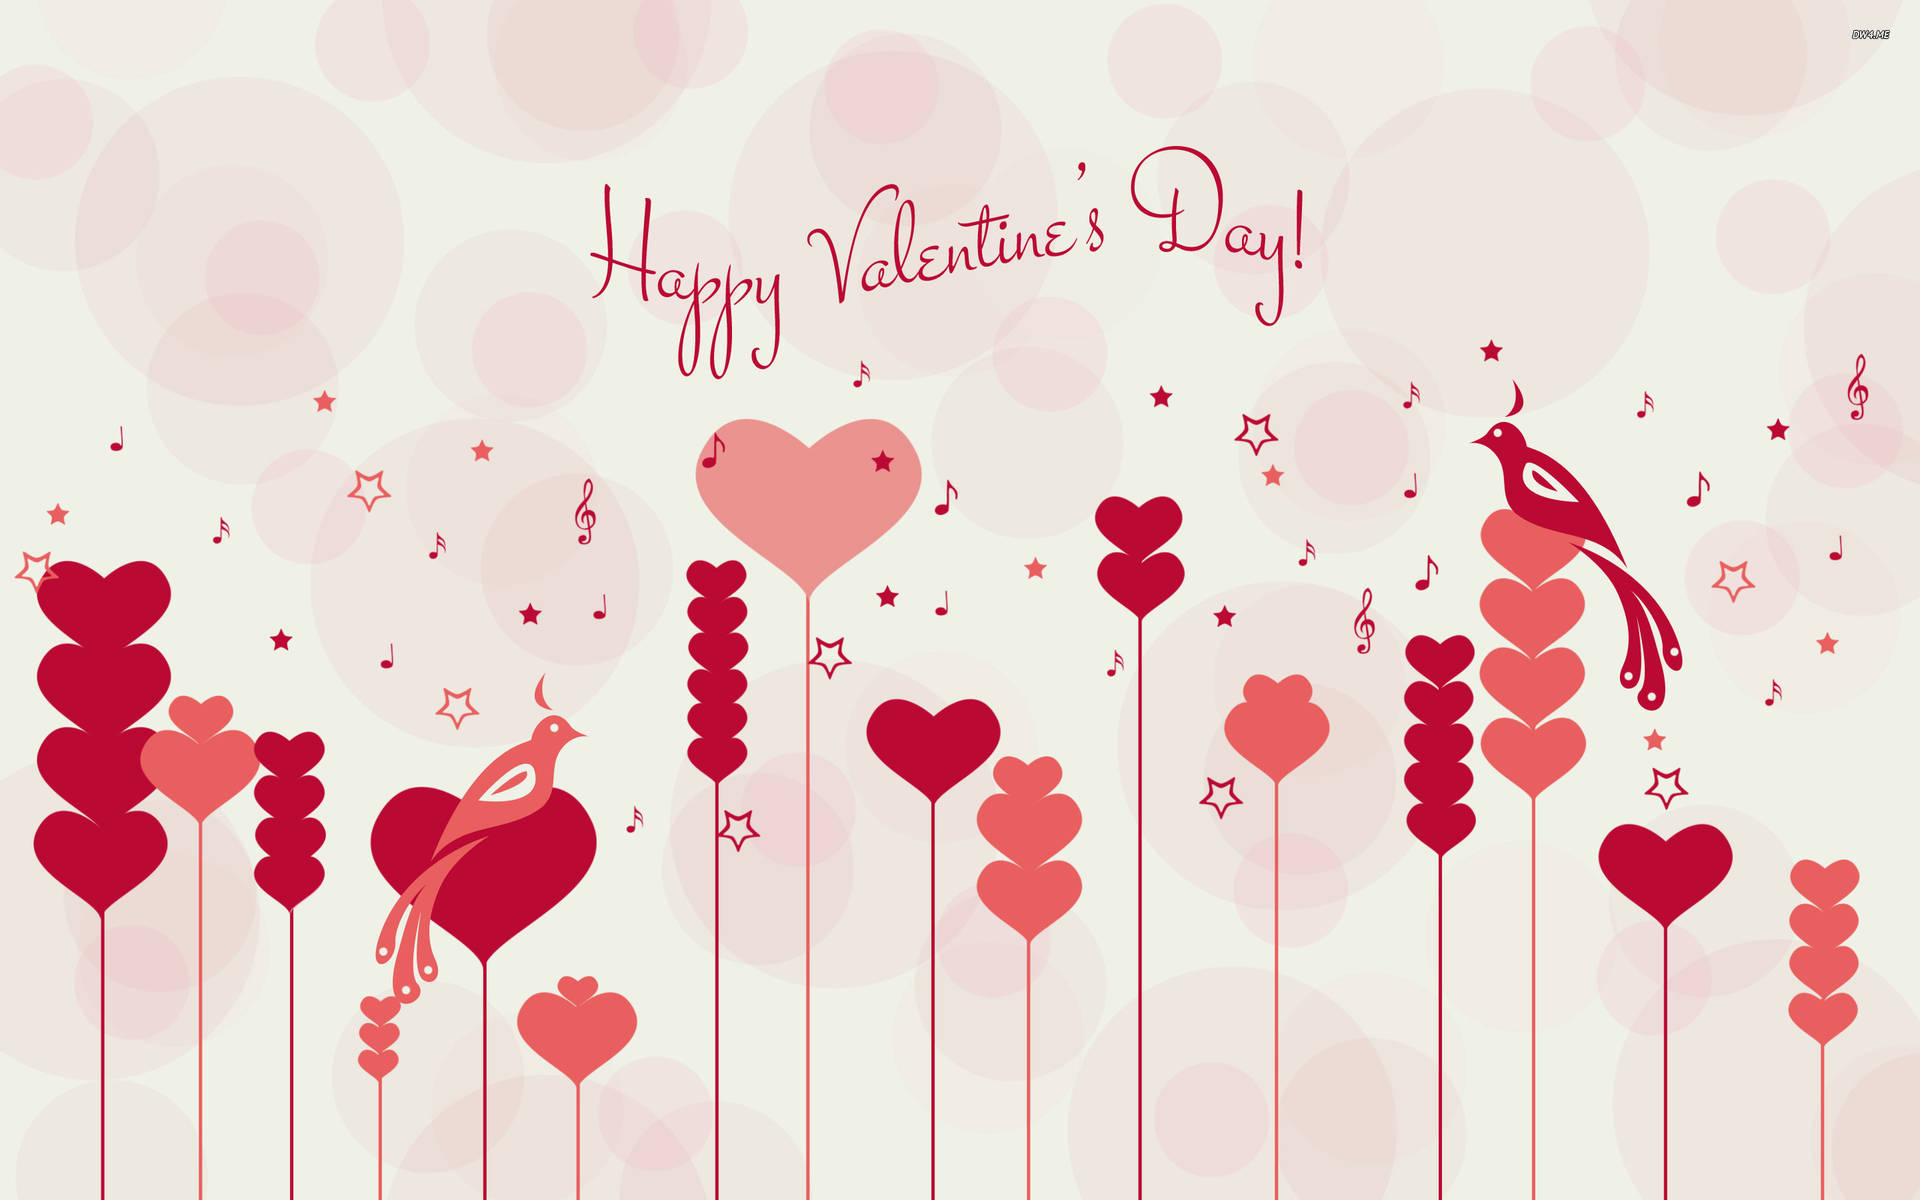 Image  Celebrate Valentine's Day with Hearts and Lovebirds Wallpaper